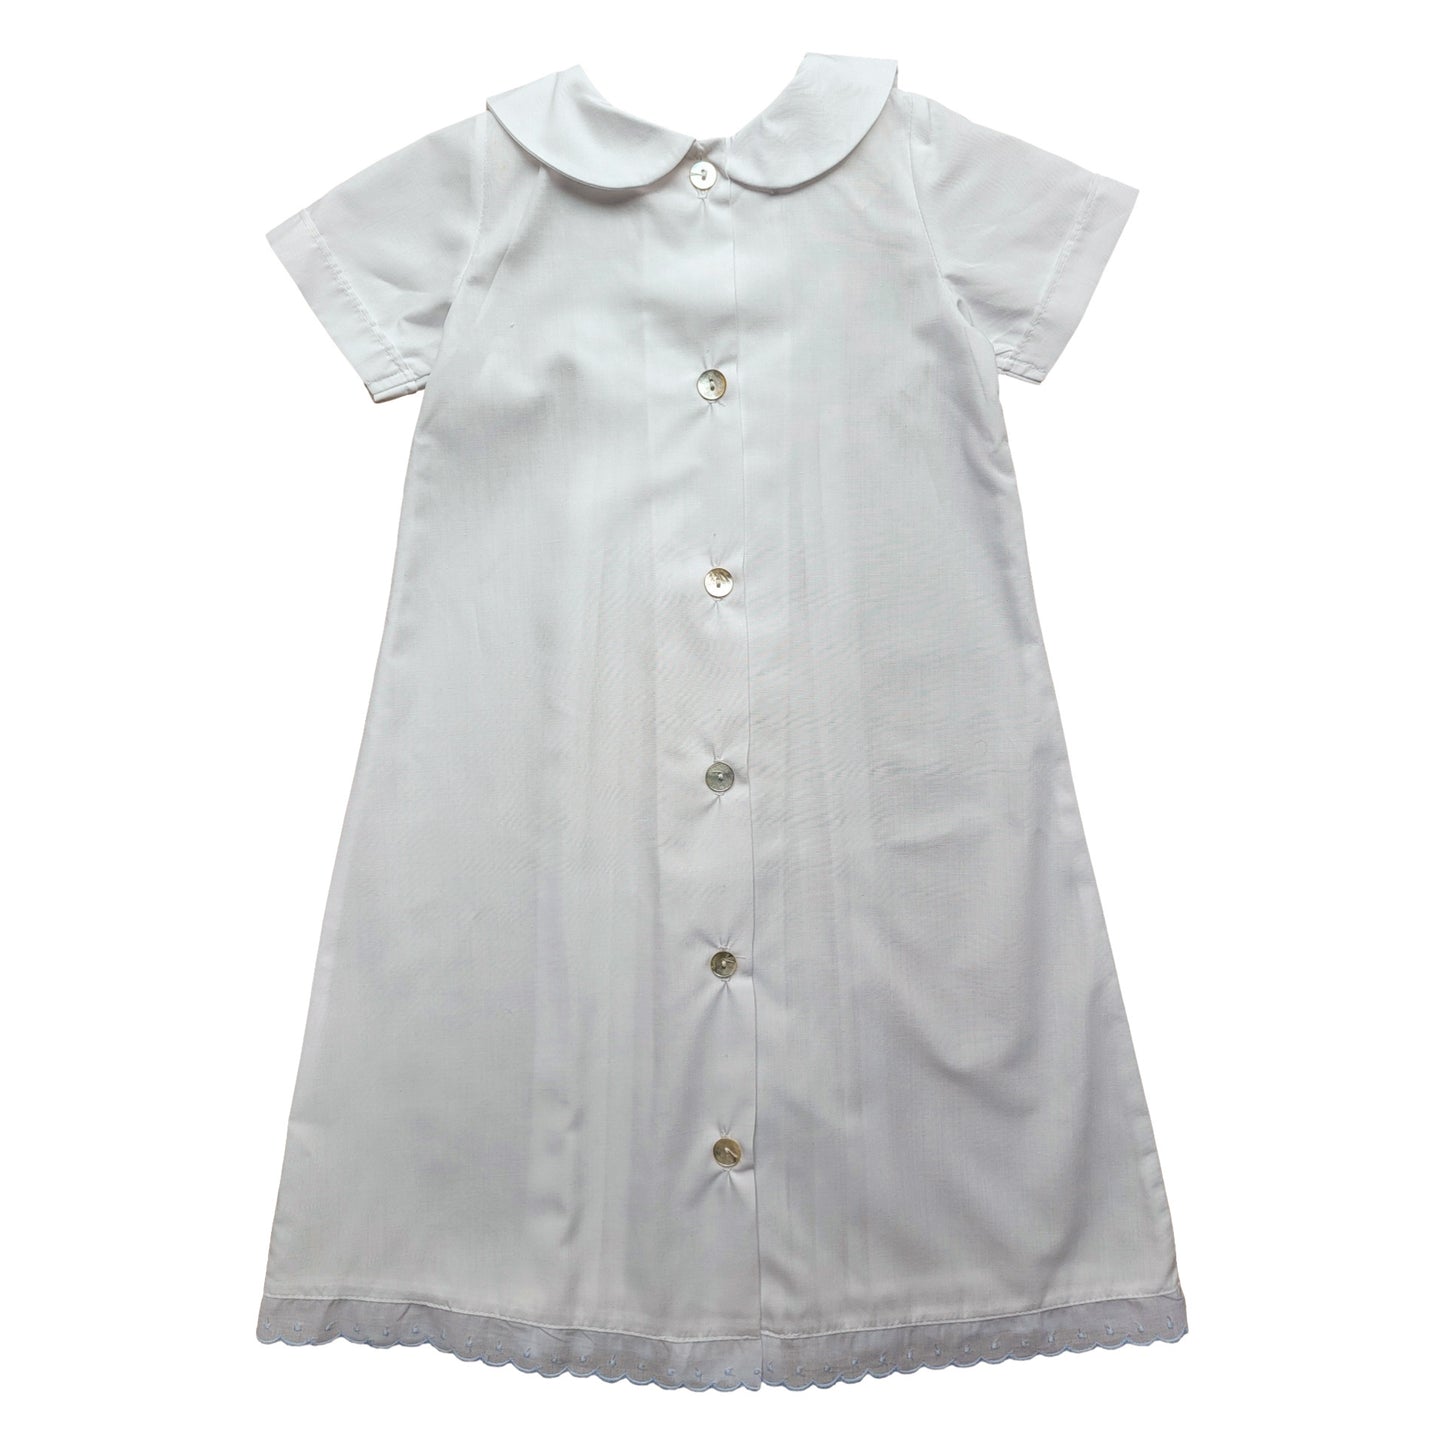 Pleated Batiste Boy Day Gown with Blue Trim